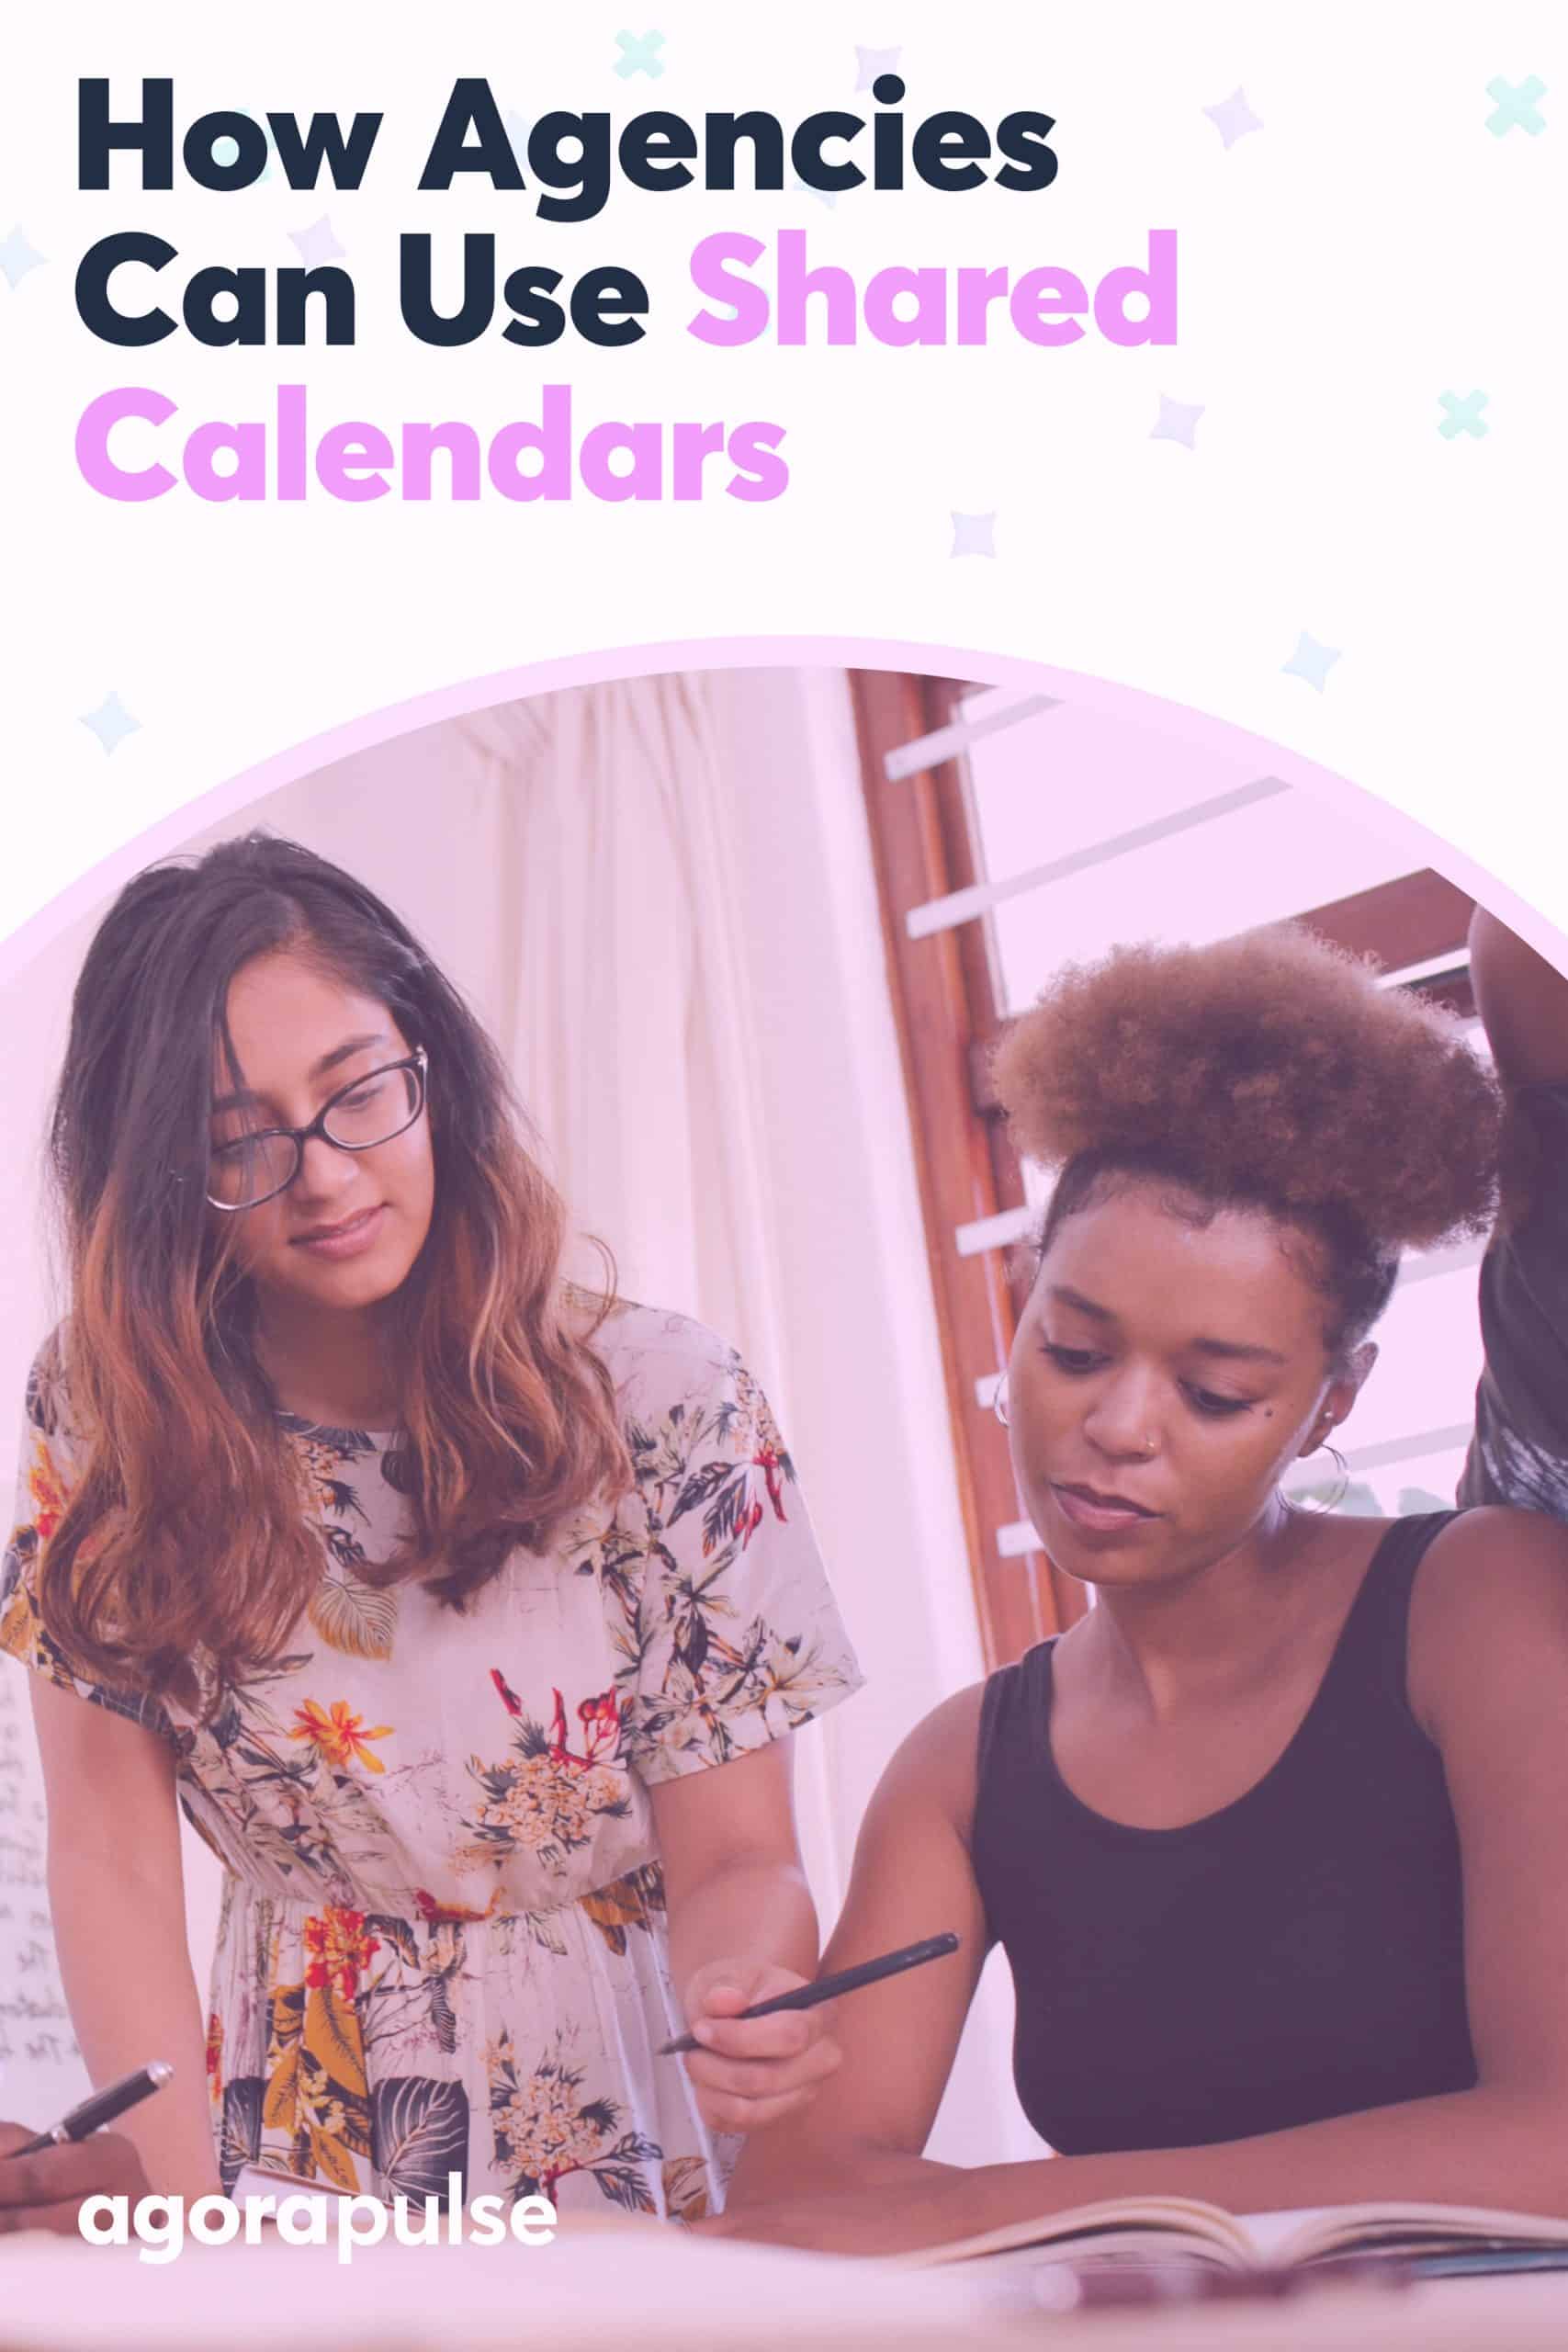 How Agencies Can Rock Team Collabs With Shared Calendars